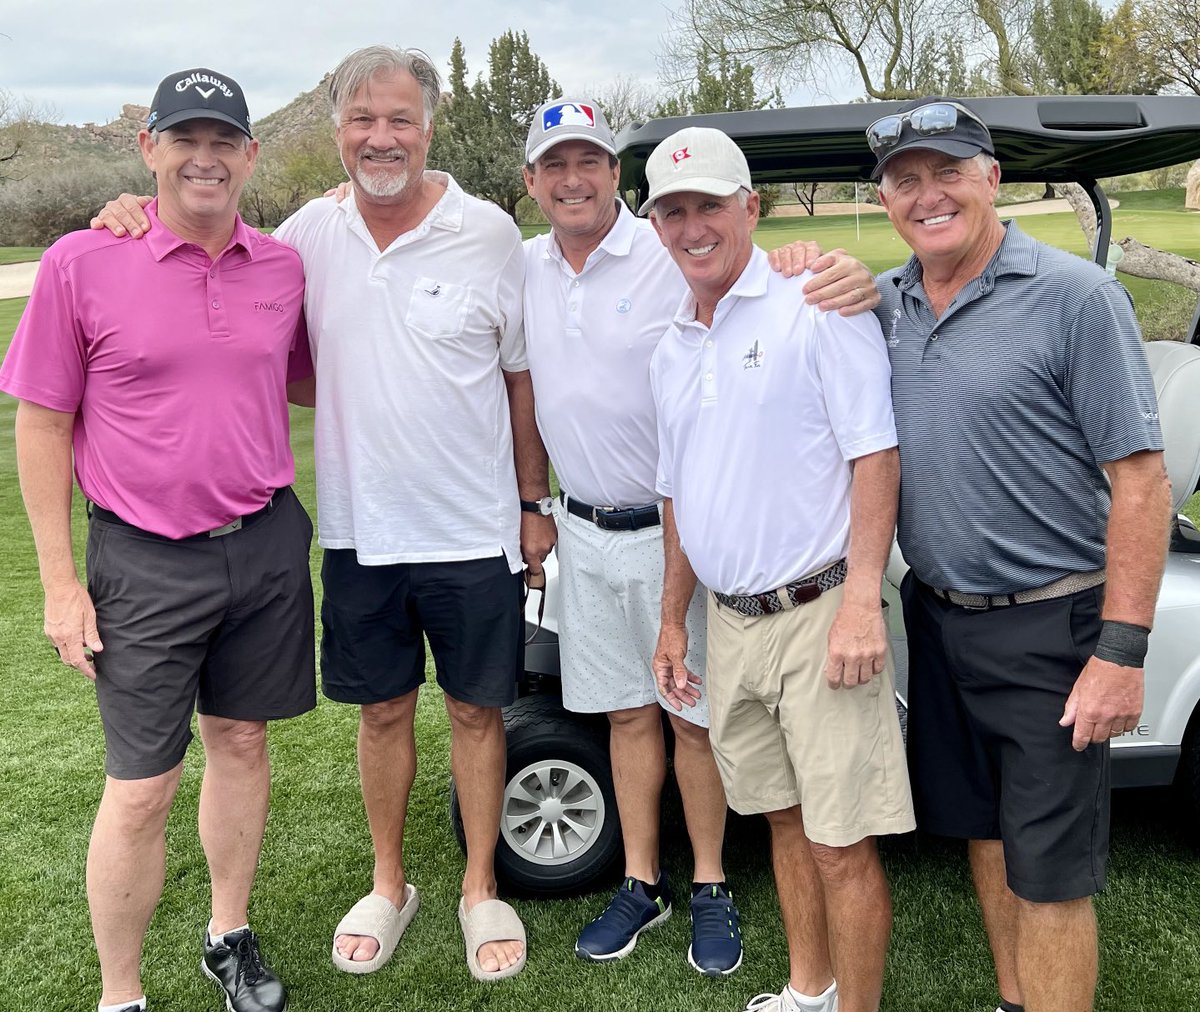 Great hang w/ these great ⁦@ChampionsTour⁩ players at Whisper Rock Golf Club this week. Big win by Willie and Billy!! ⁦@LeeJanzen⁩ ⁦@FredFunk9⁩ Willie Wood and The Andrew Magee